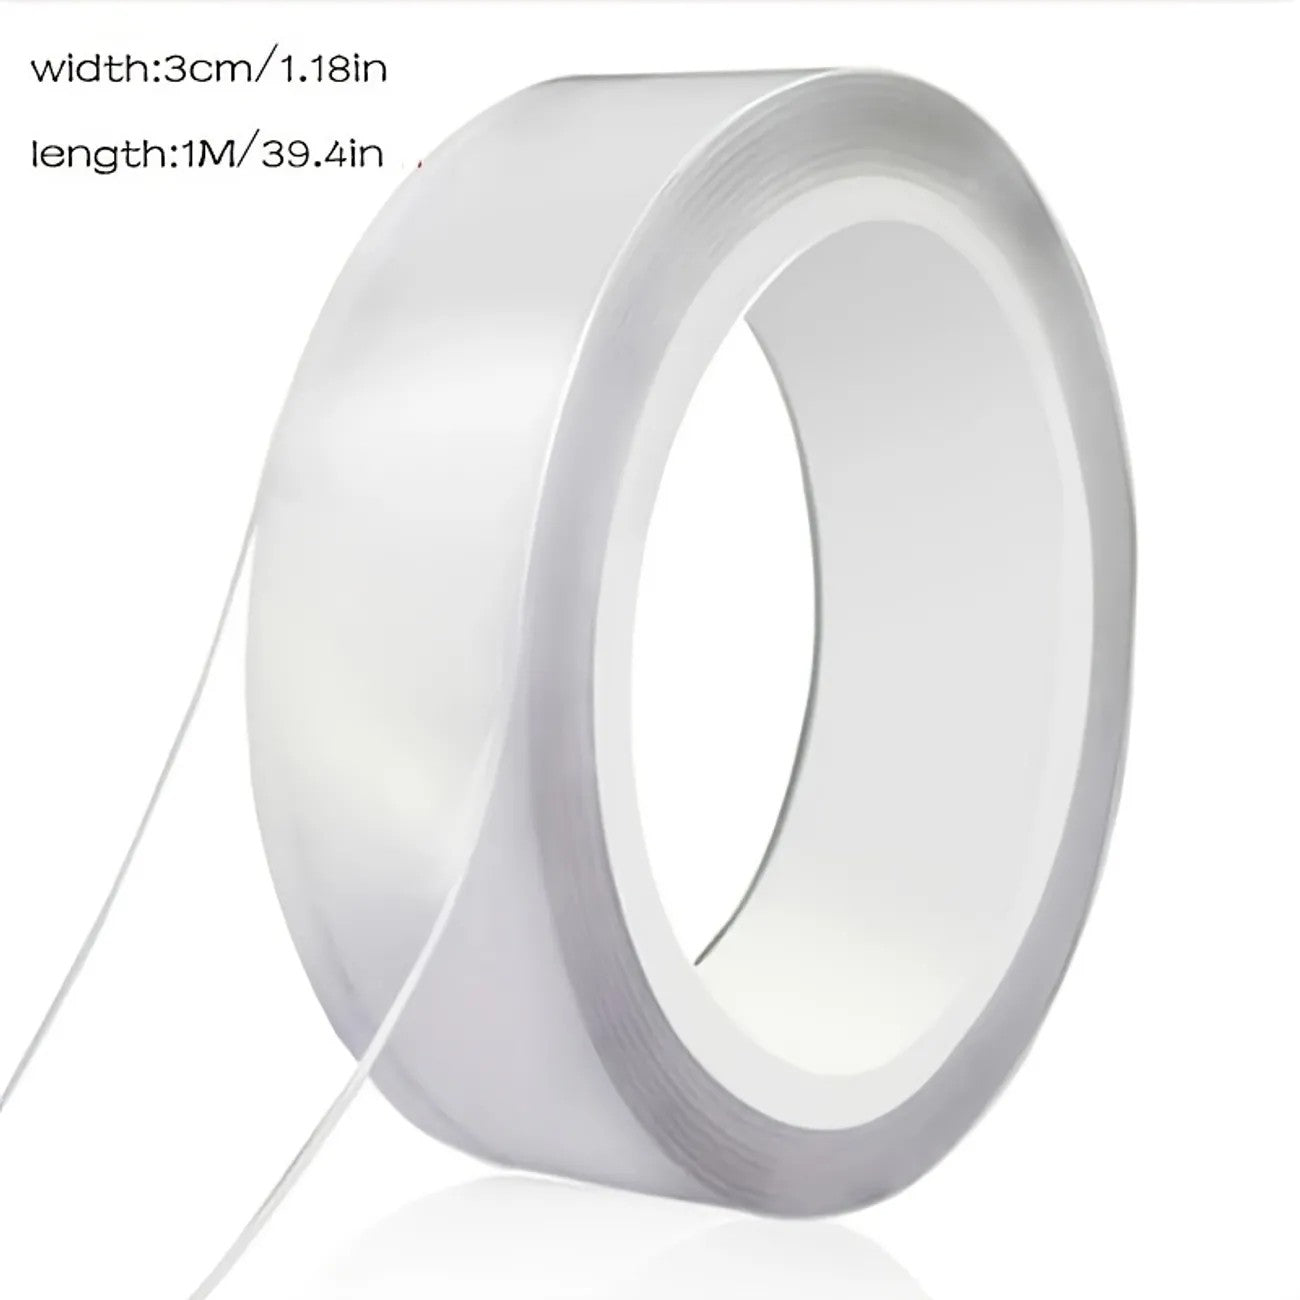 1 Roll Nano Tape Double Sided Tape Transparent Reusable Waterproof Adhesive Tapes Cleanable Kitchen Bathroom Supplies Tapes